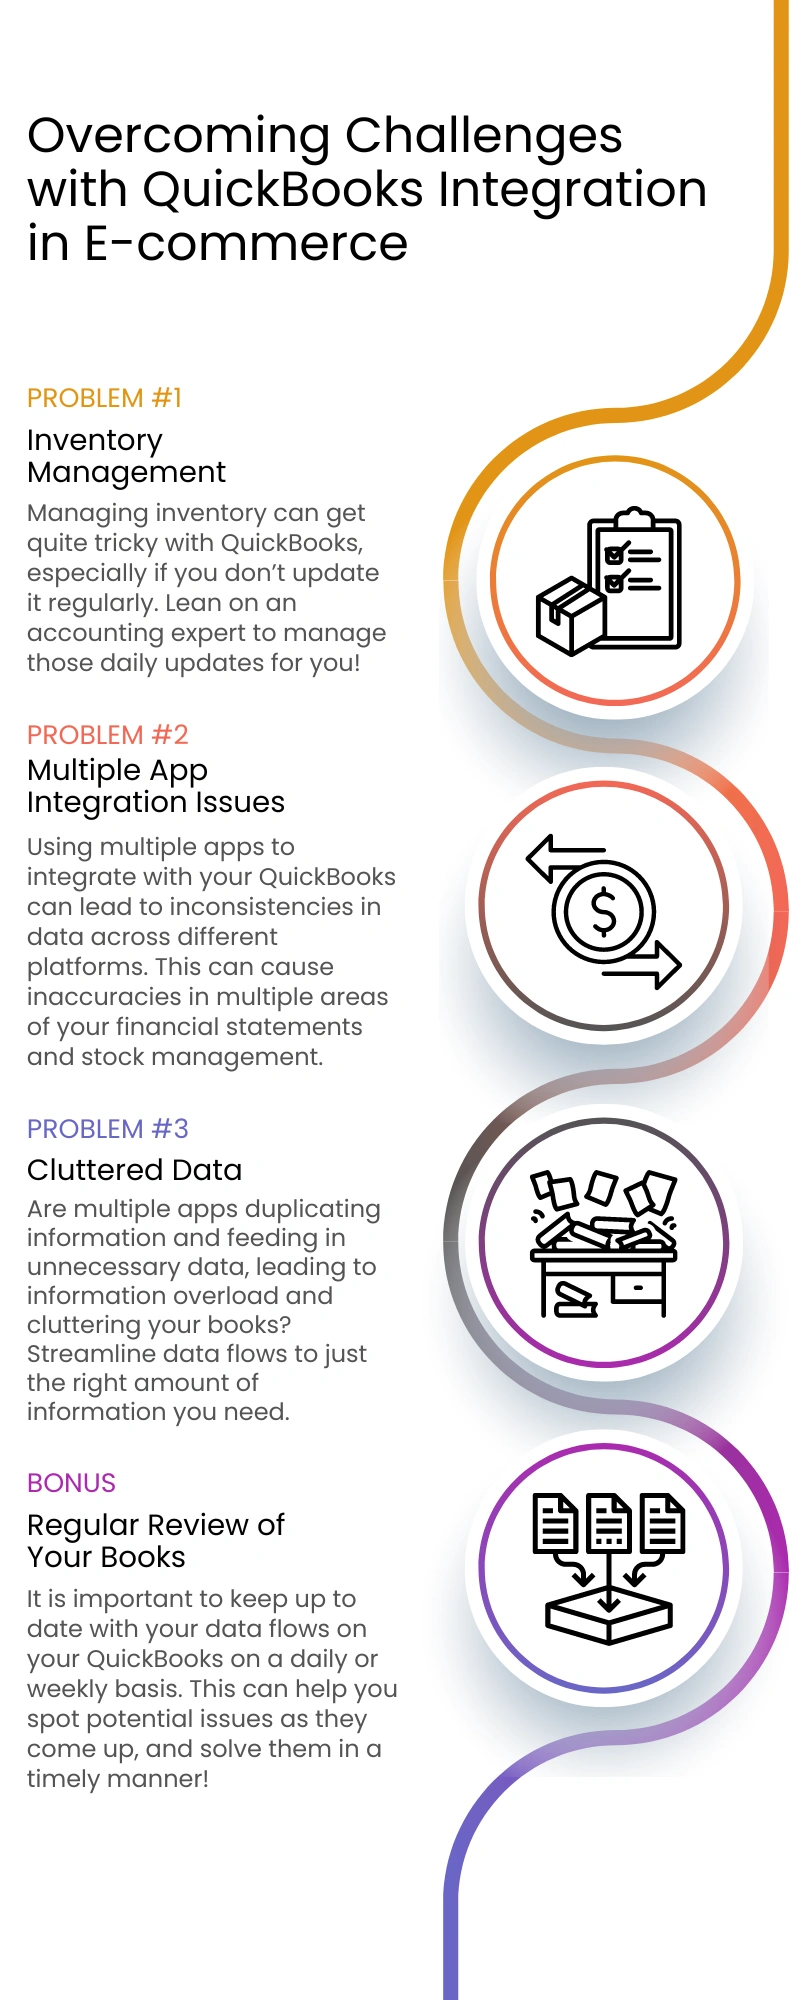 QuickBooks for E-commerce 3 Issues You May Face